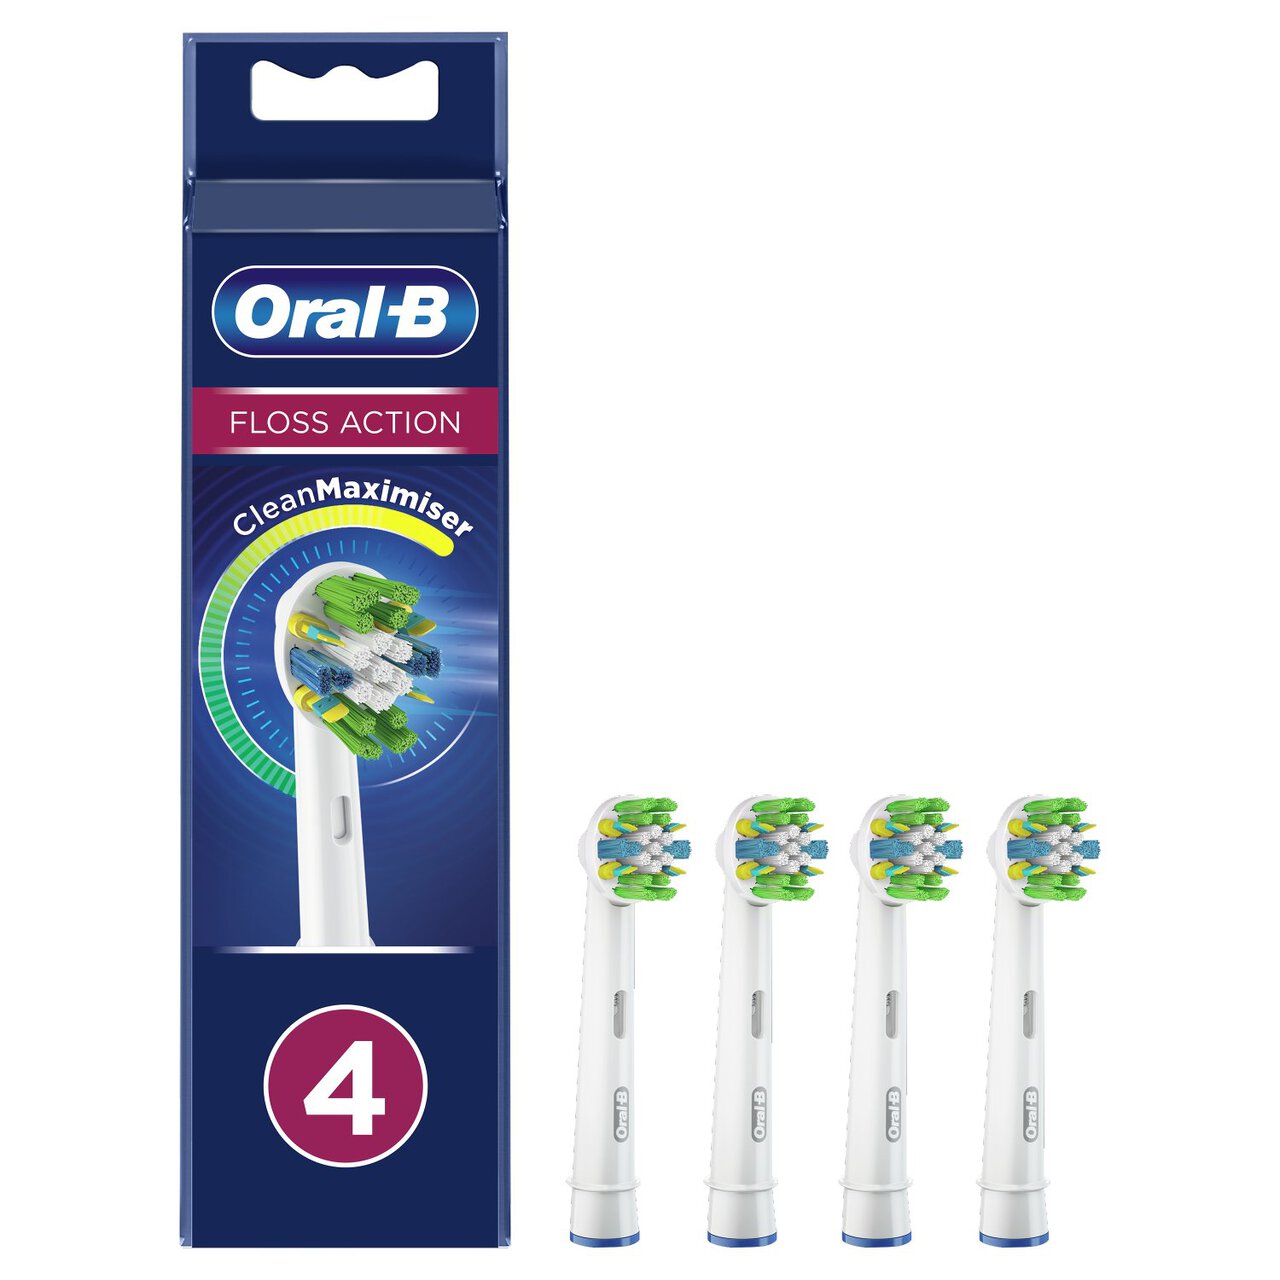 Oral-B FlossAction Toothbrush Heads 4 per pack